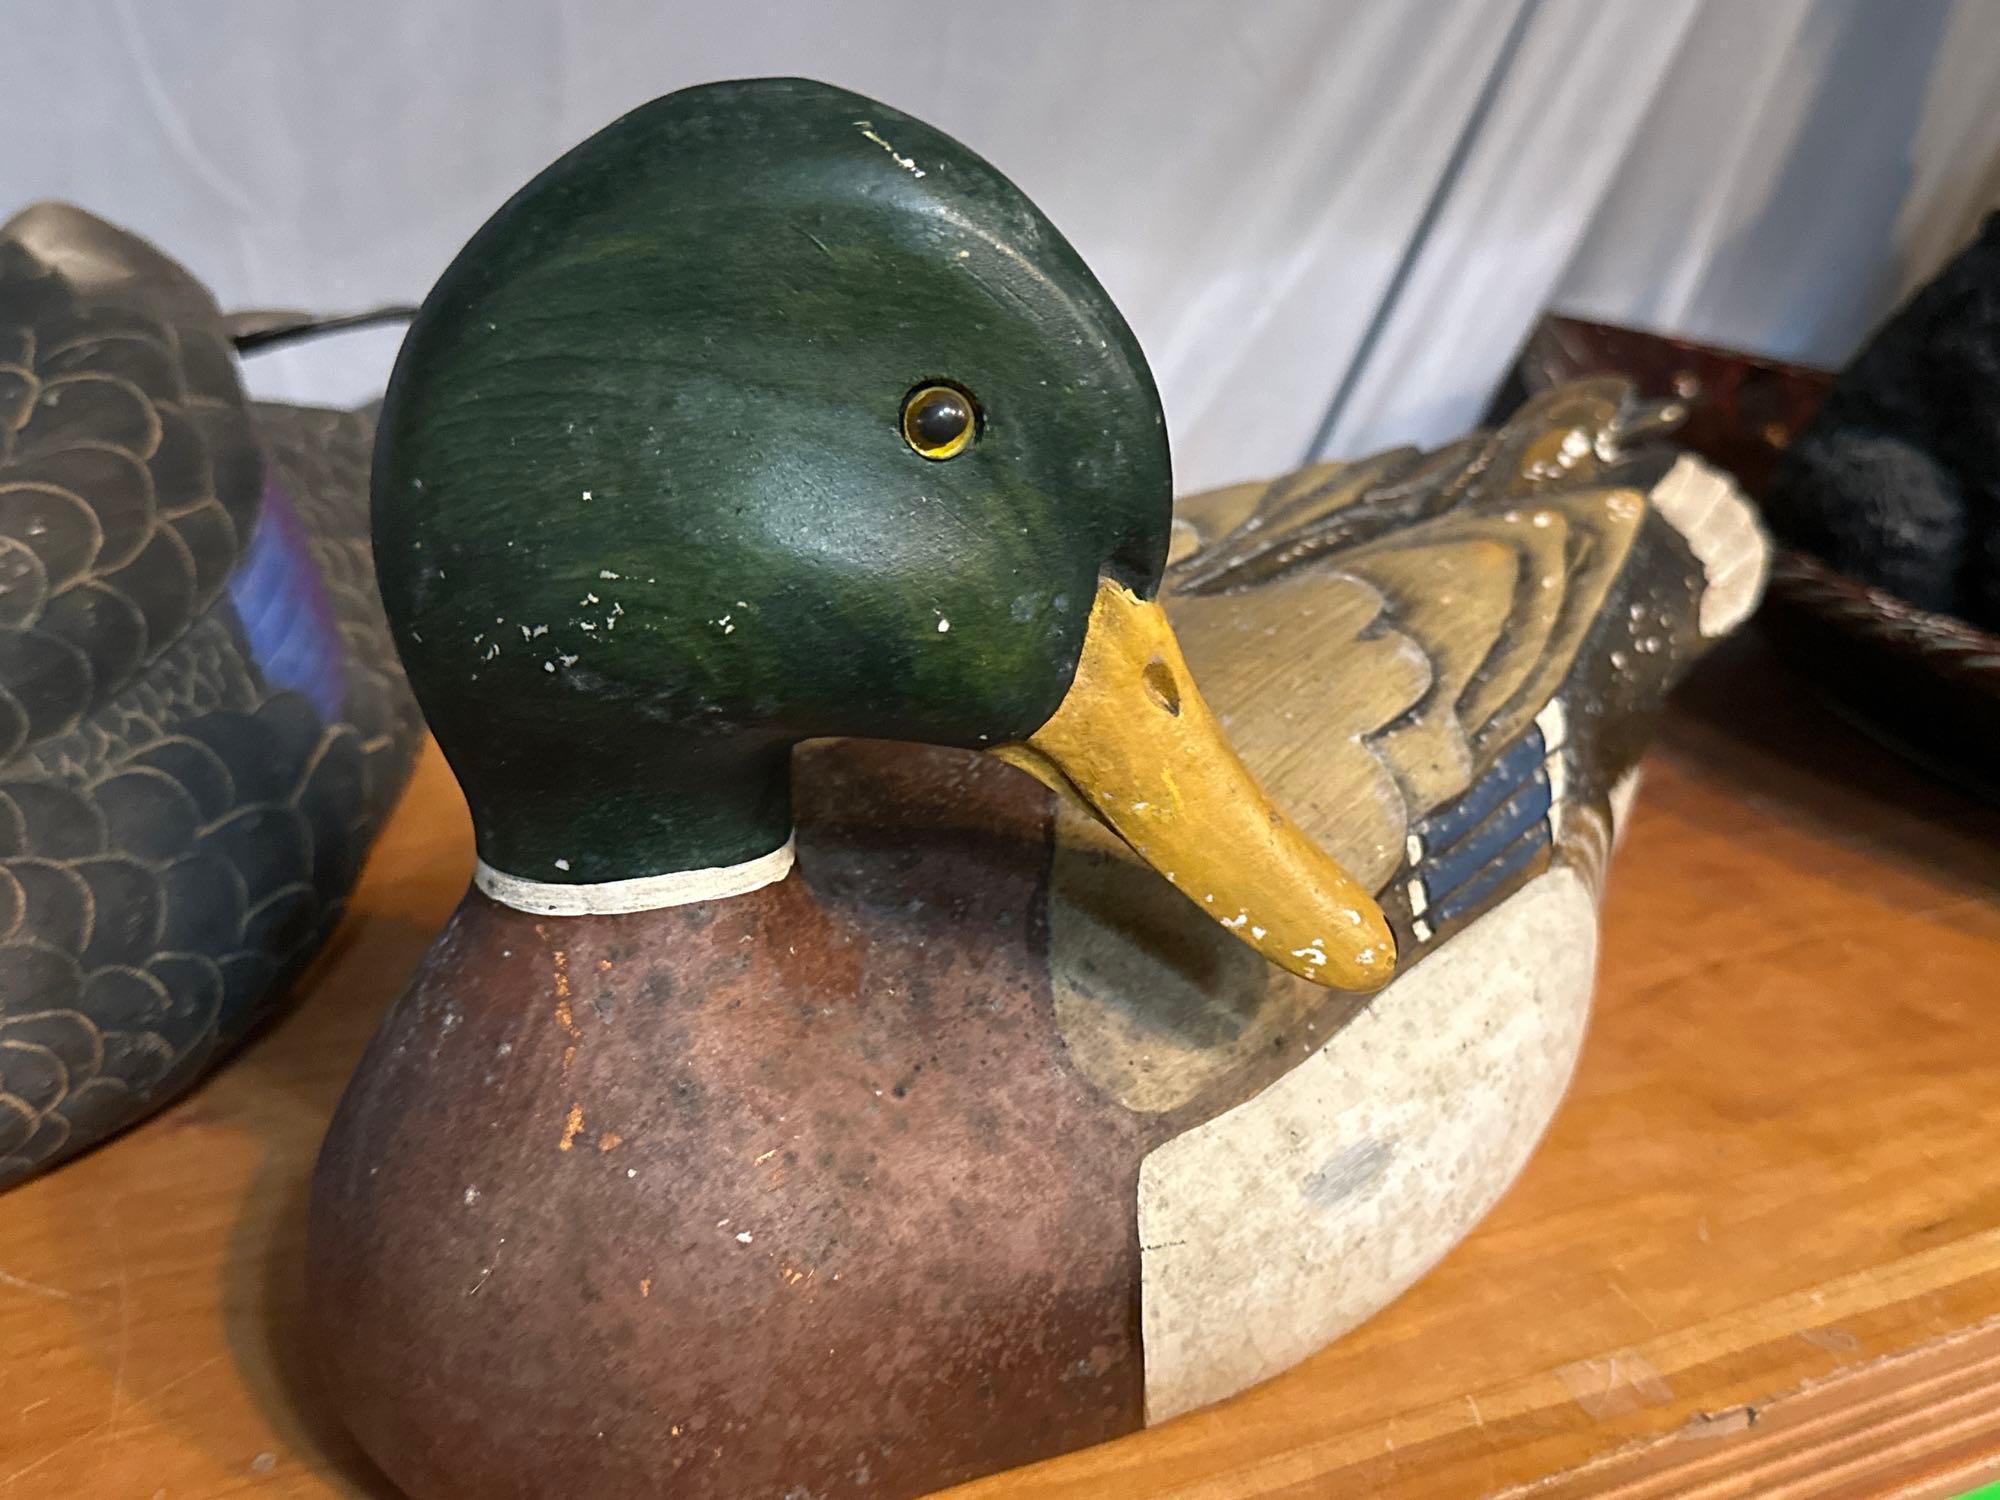 2 Carved Ducks from Ducks Unlimited - one is signed by Tom Taber